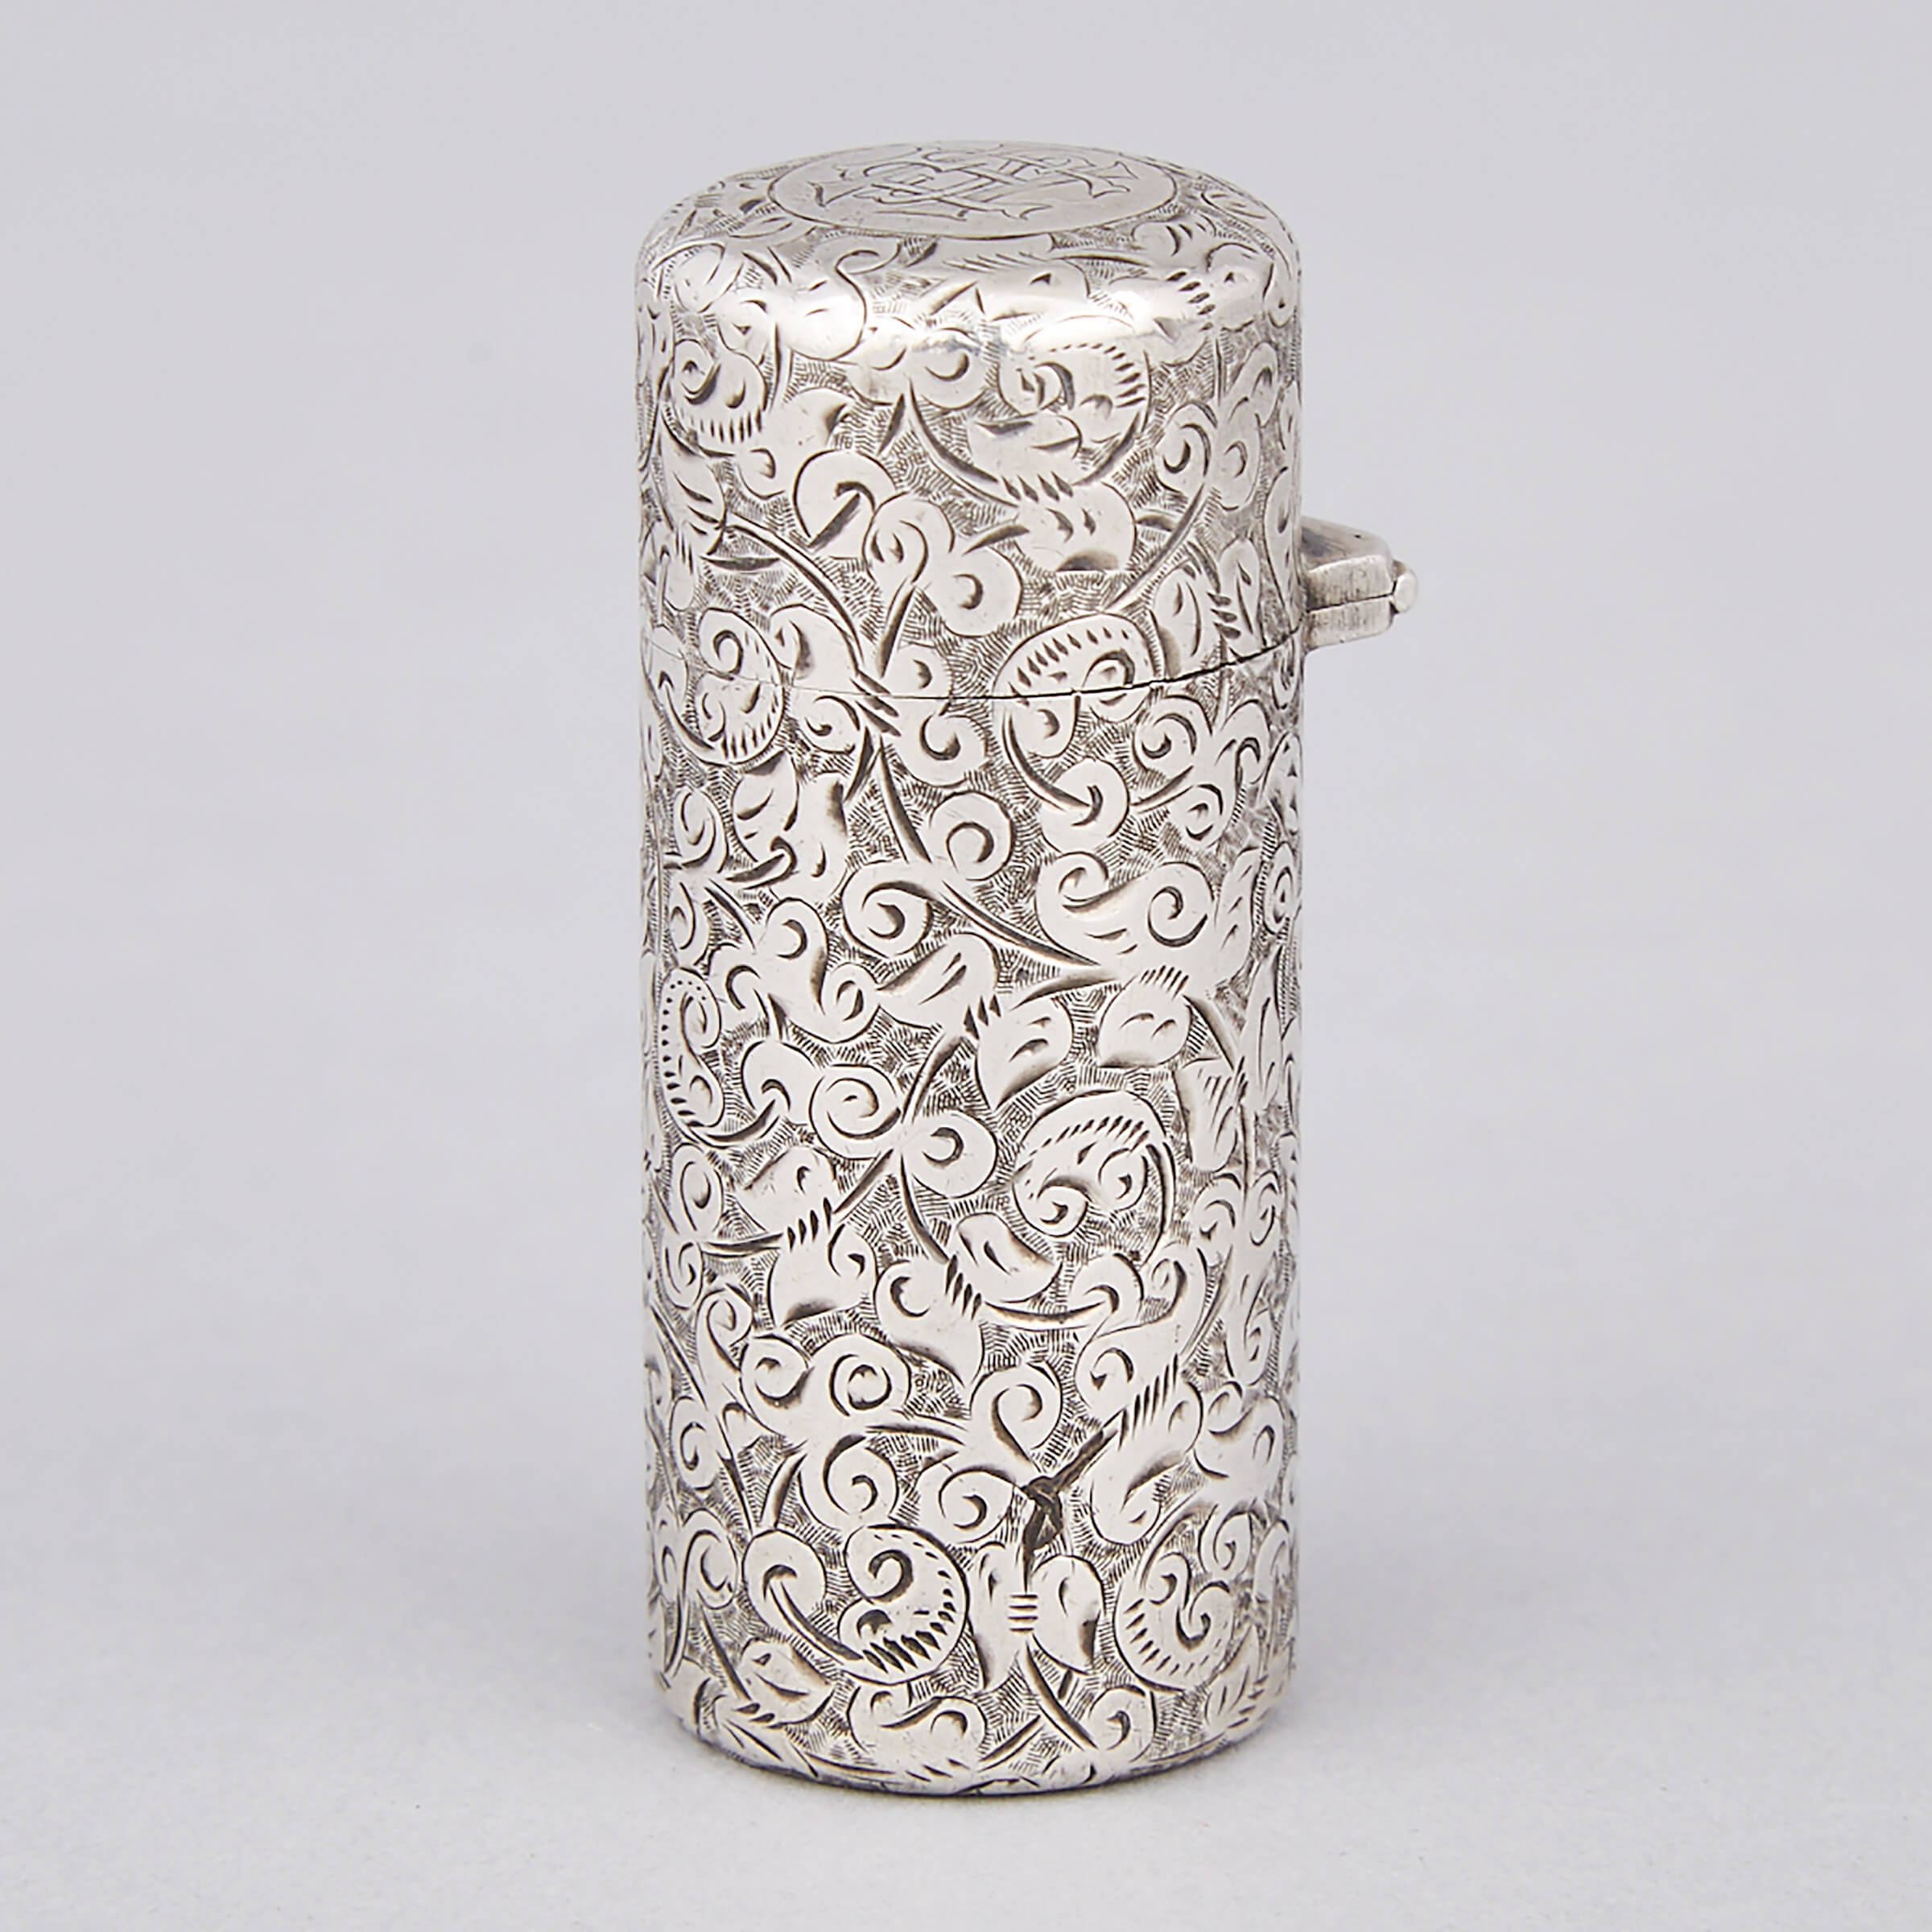 Victorian Engraved Silver and Glass Perfume Bottle, Sampson Mordan & Co., London, 1888